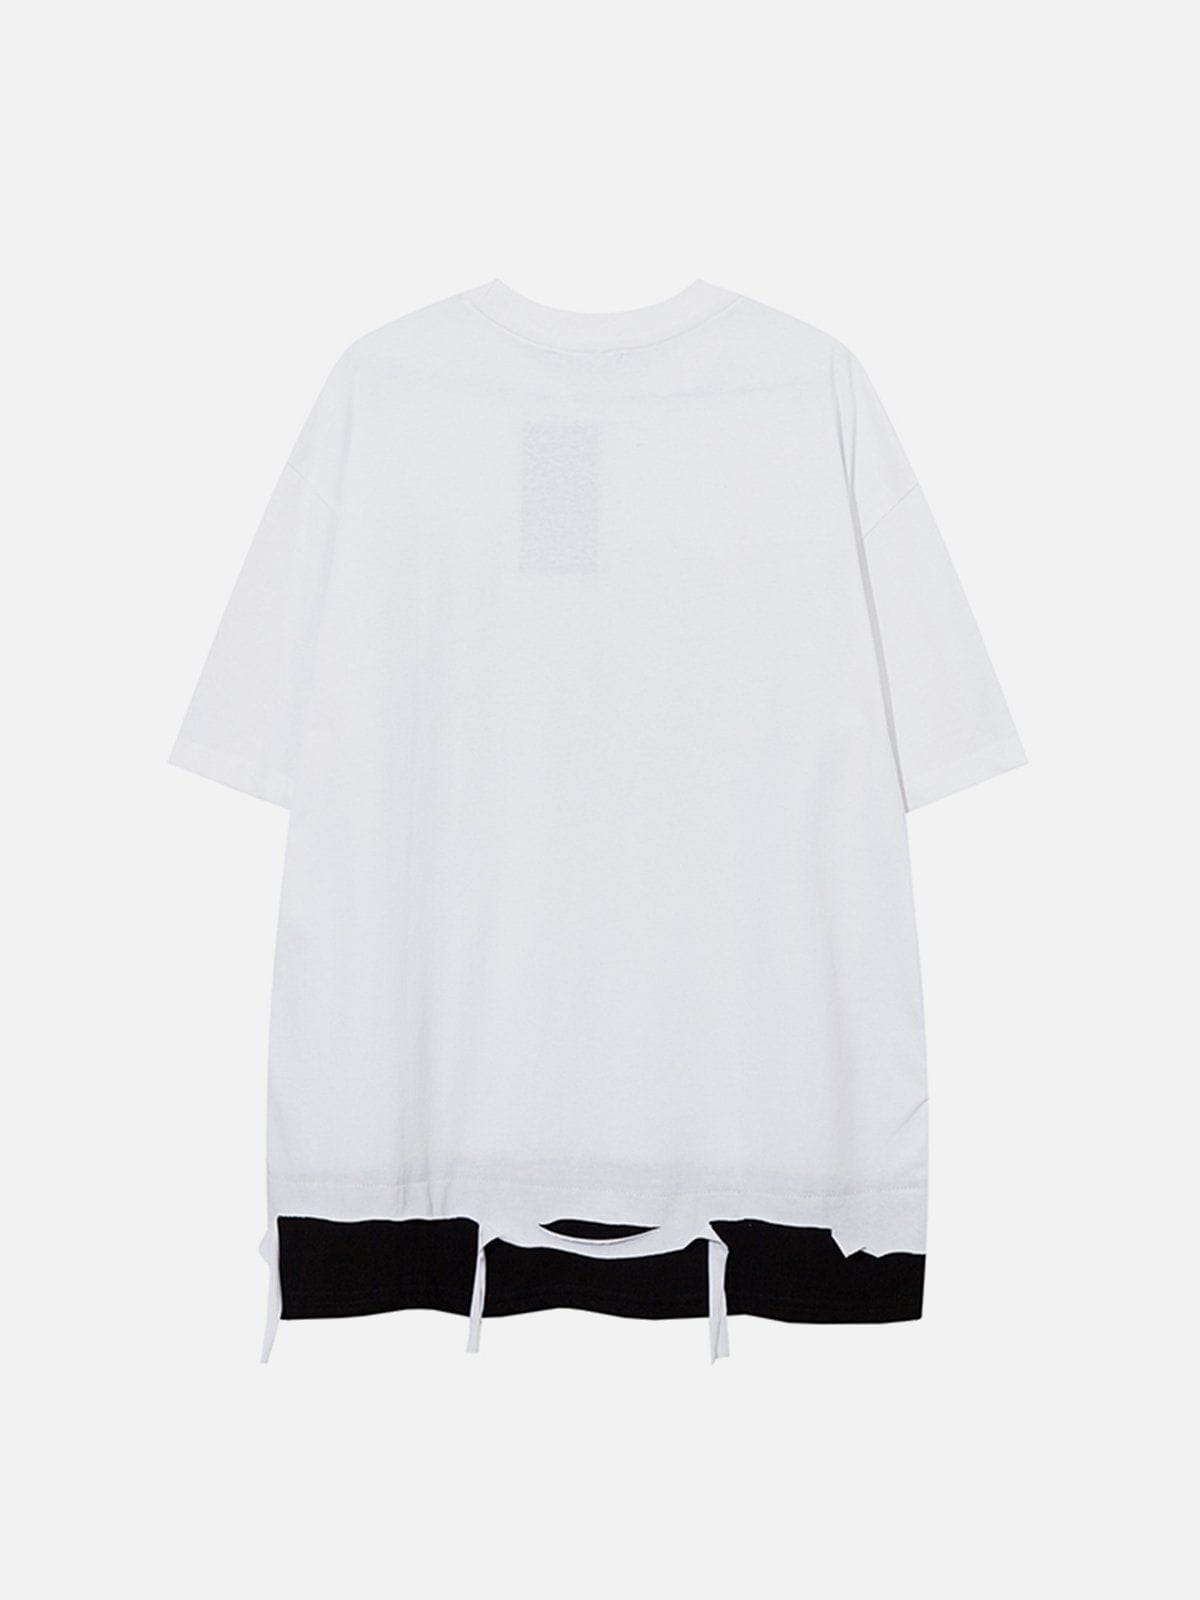 Sneakerland™ - Faux Two-Piece Tee